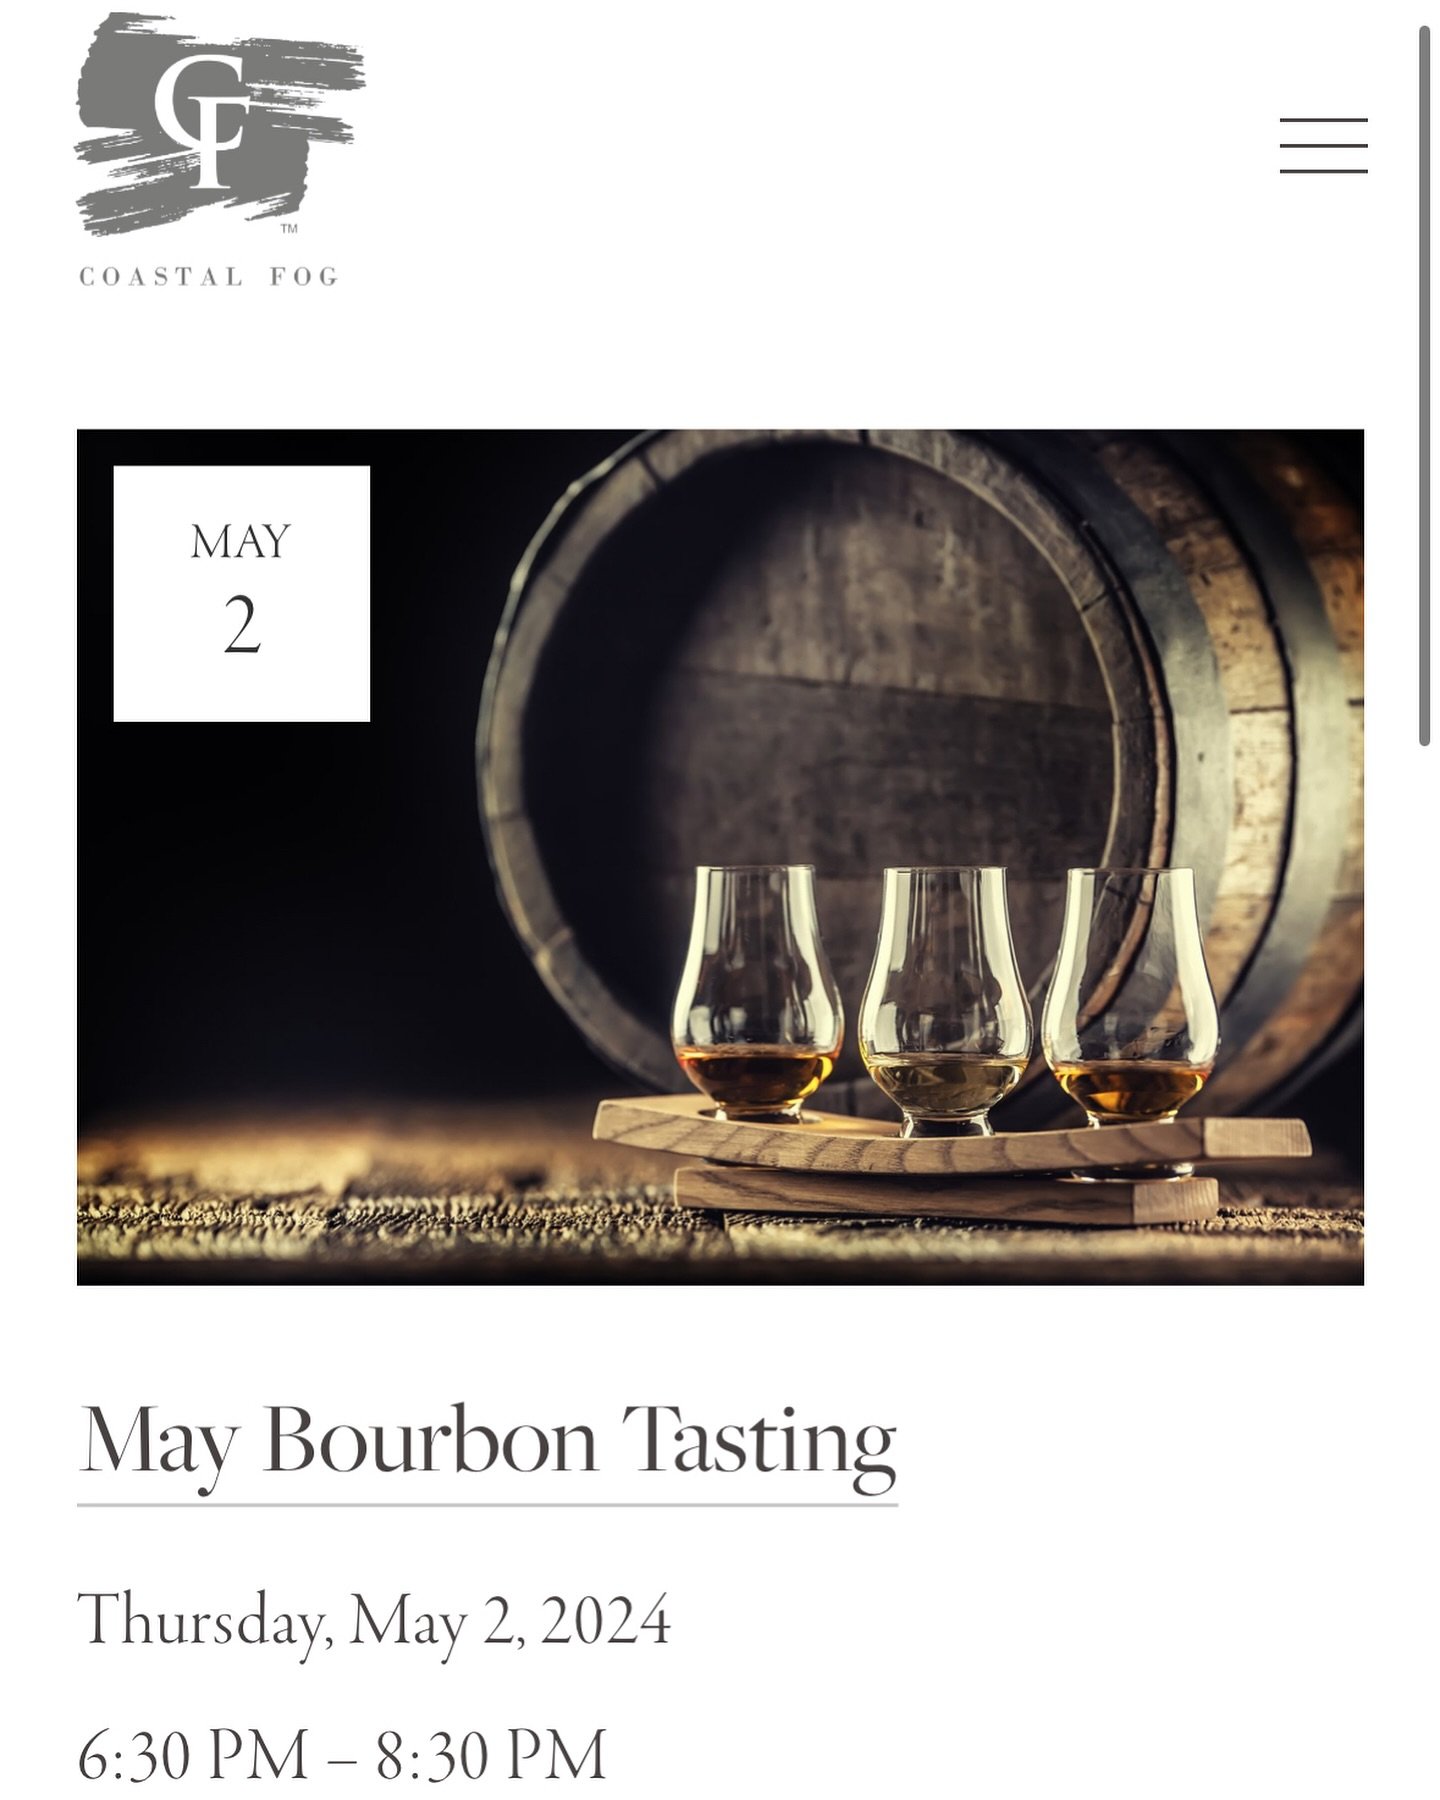 Join us for our ever popular and always entertaining CF Bourbon Tasting. We feature, taste and discuss the best of the best bourbons. Individual charcuterie and popcorn also served. Link in profile for tickets.